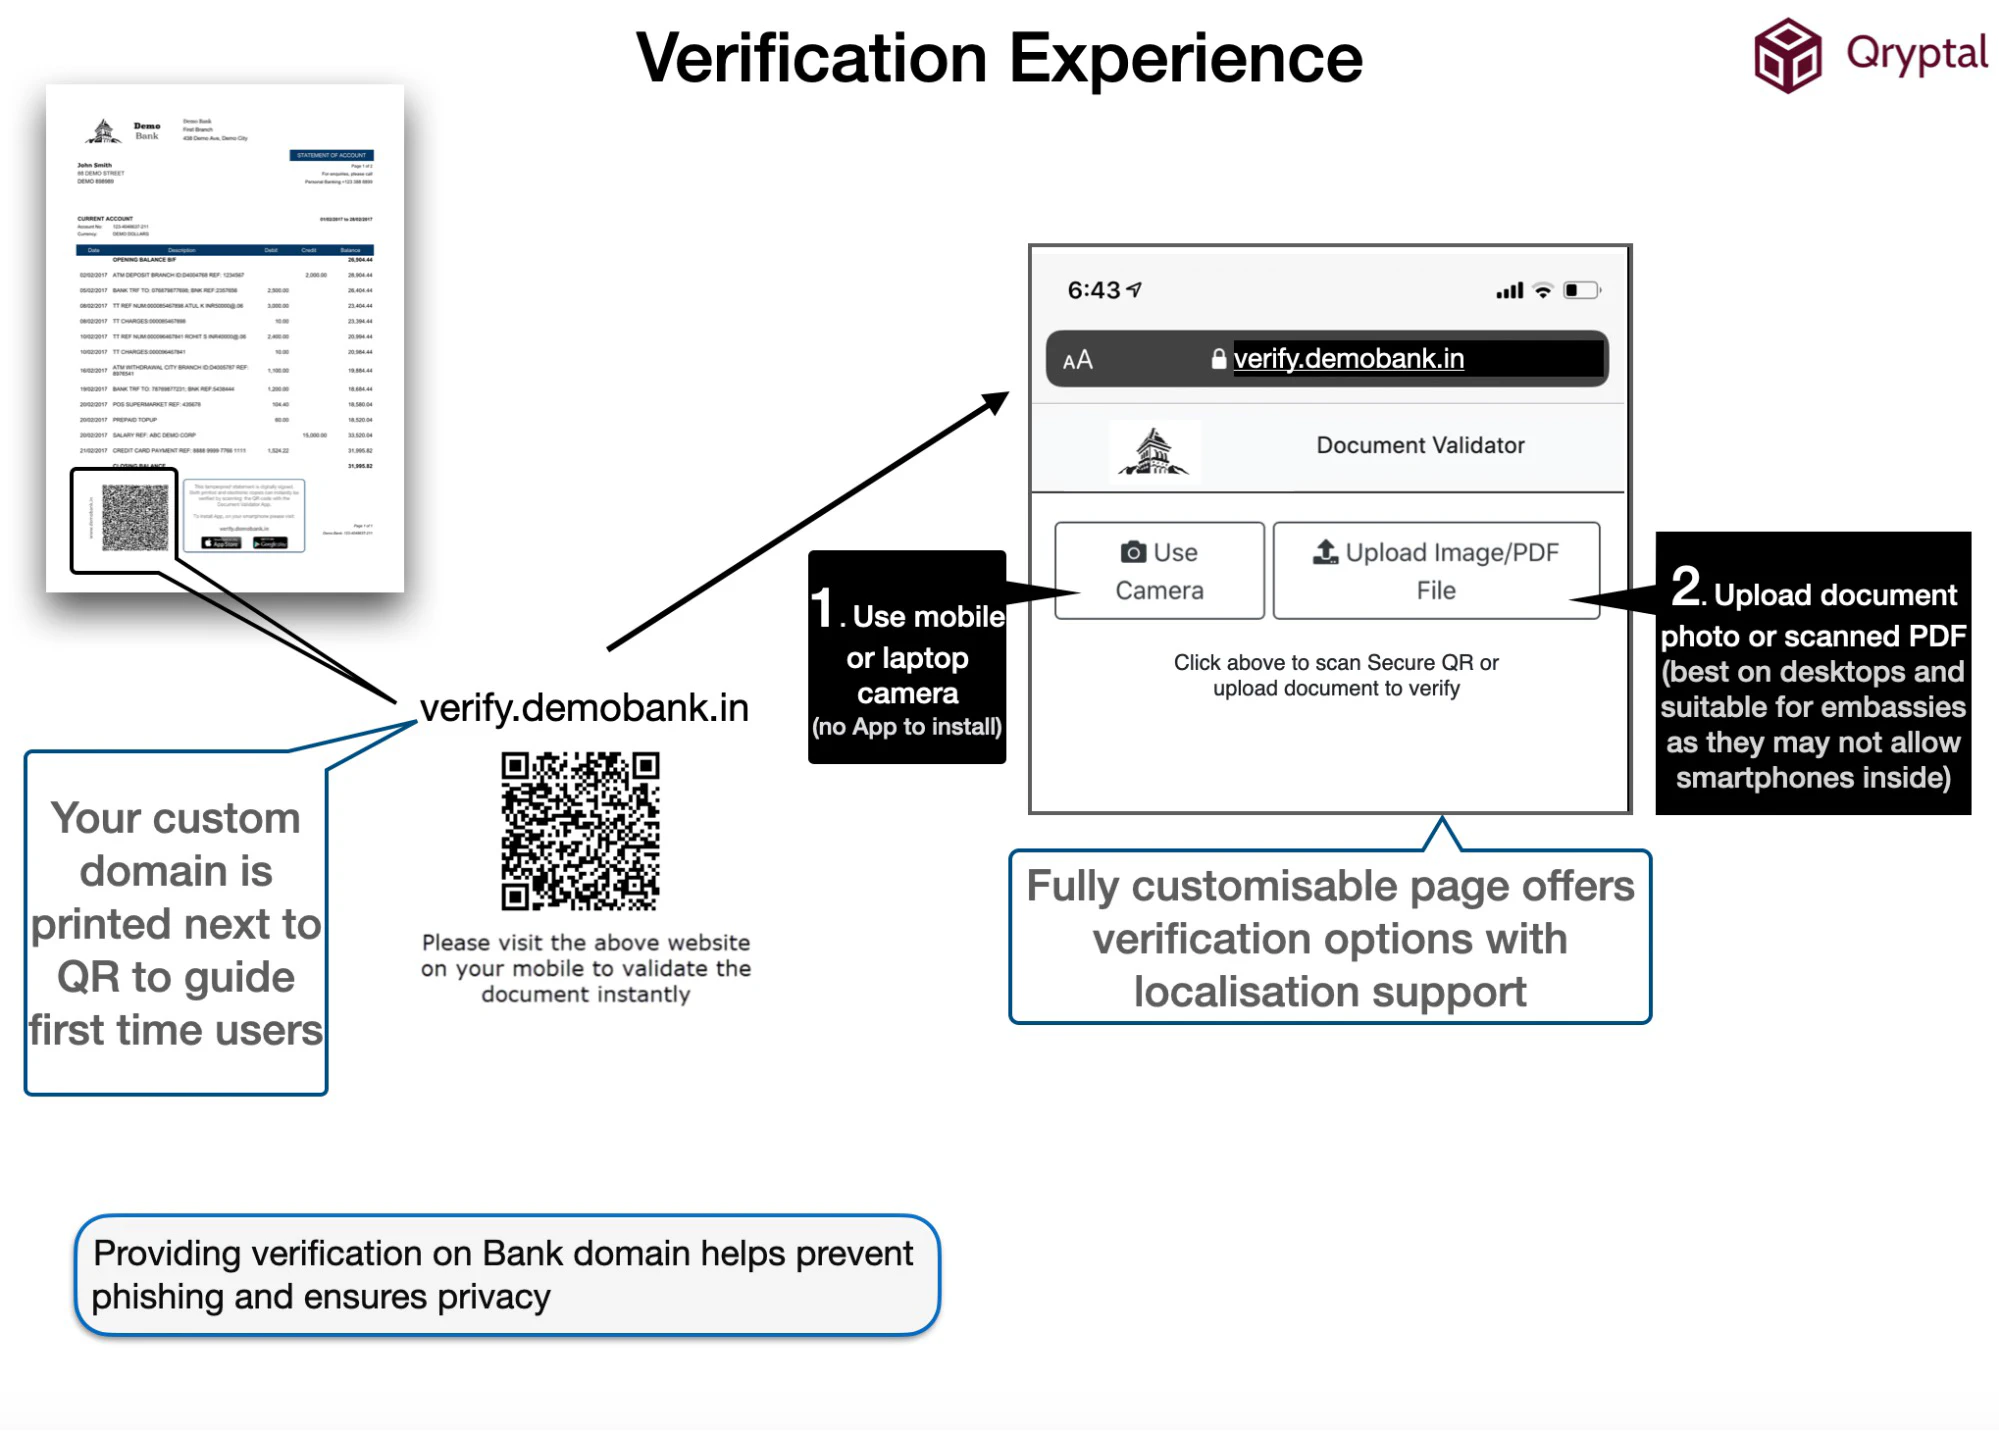 The Verification experience